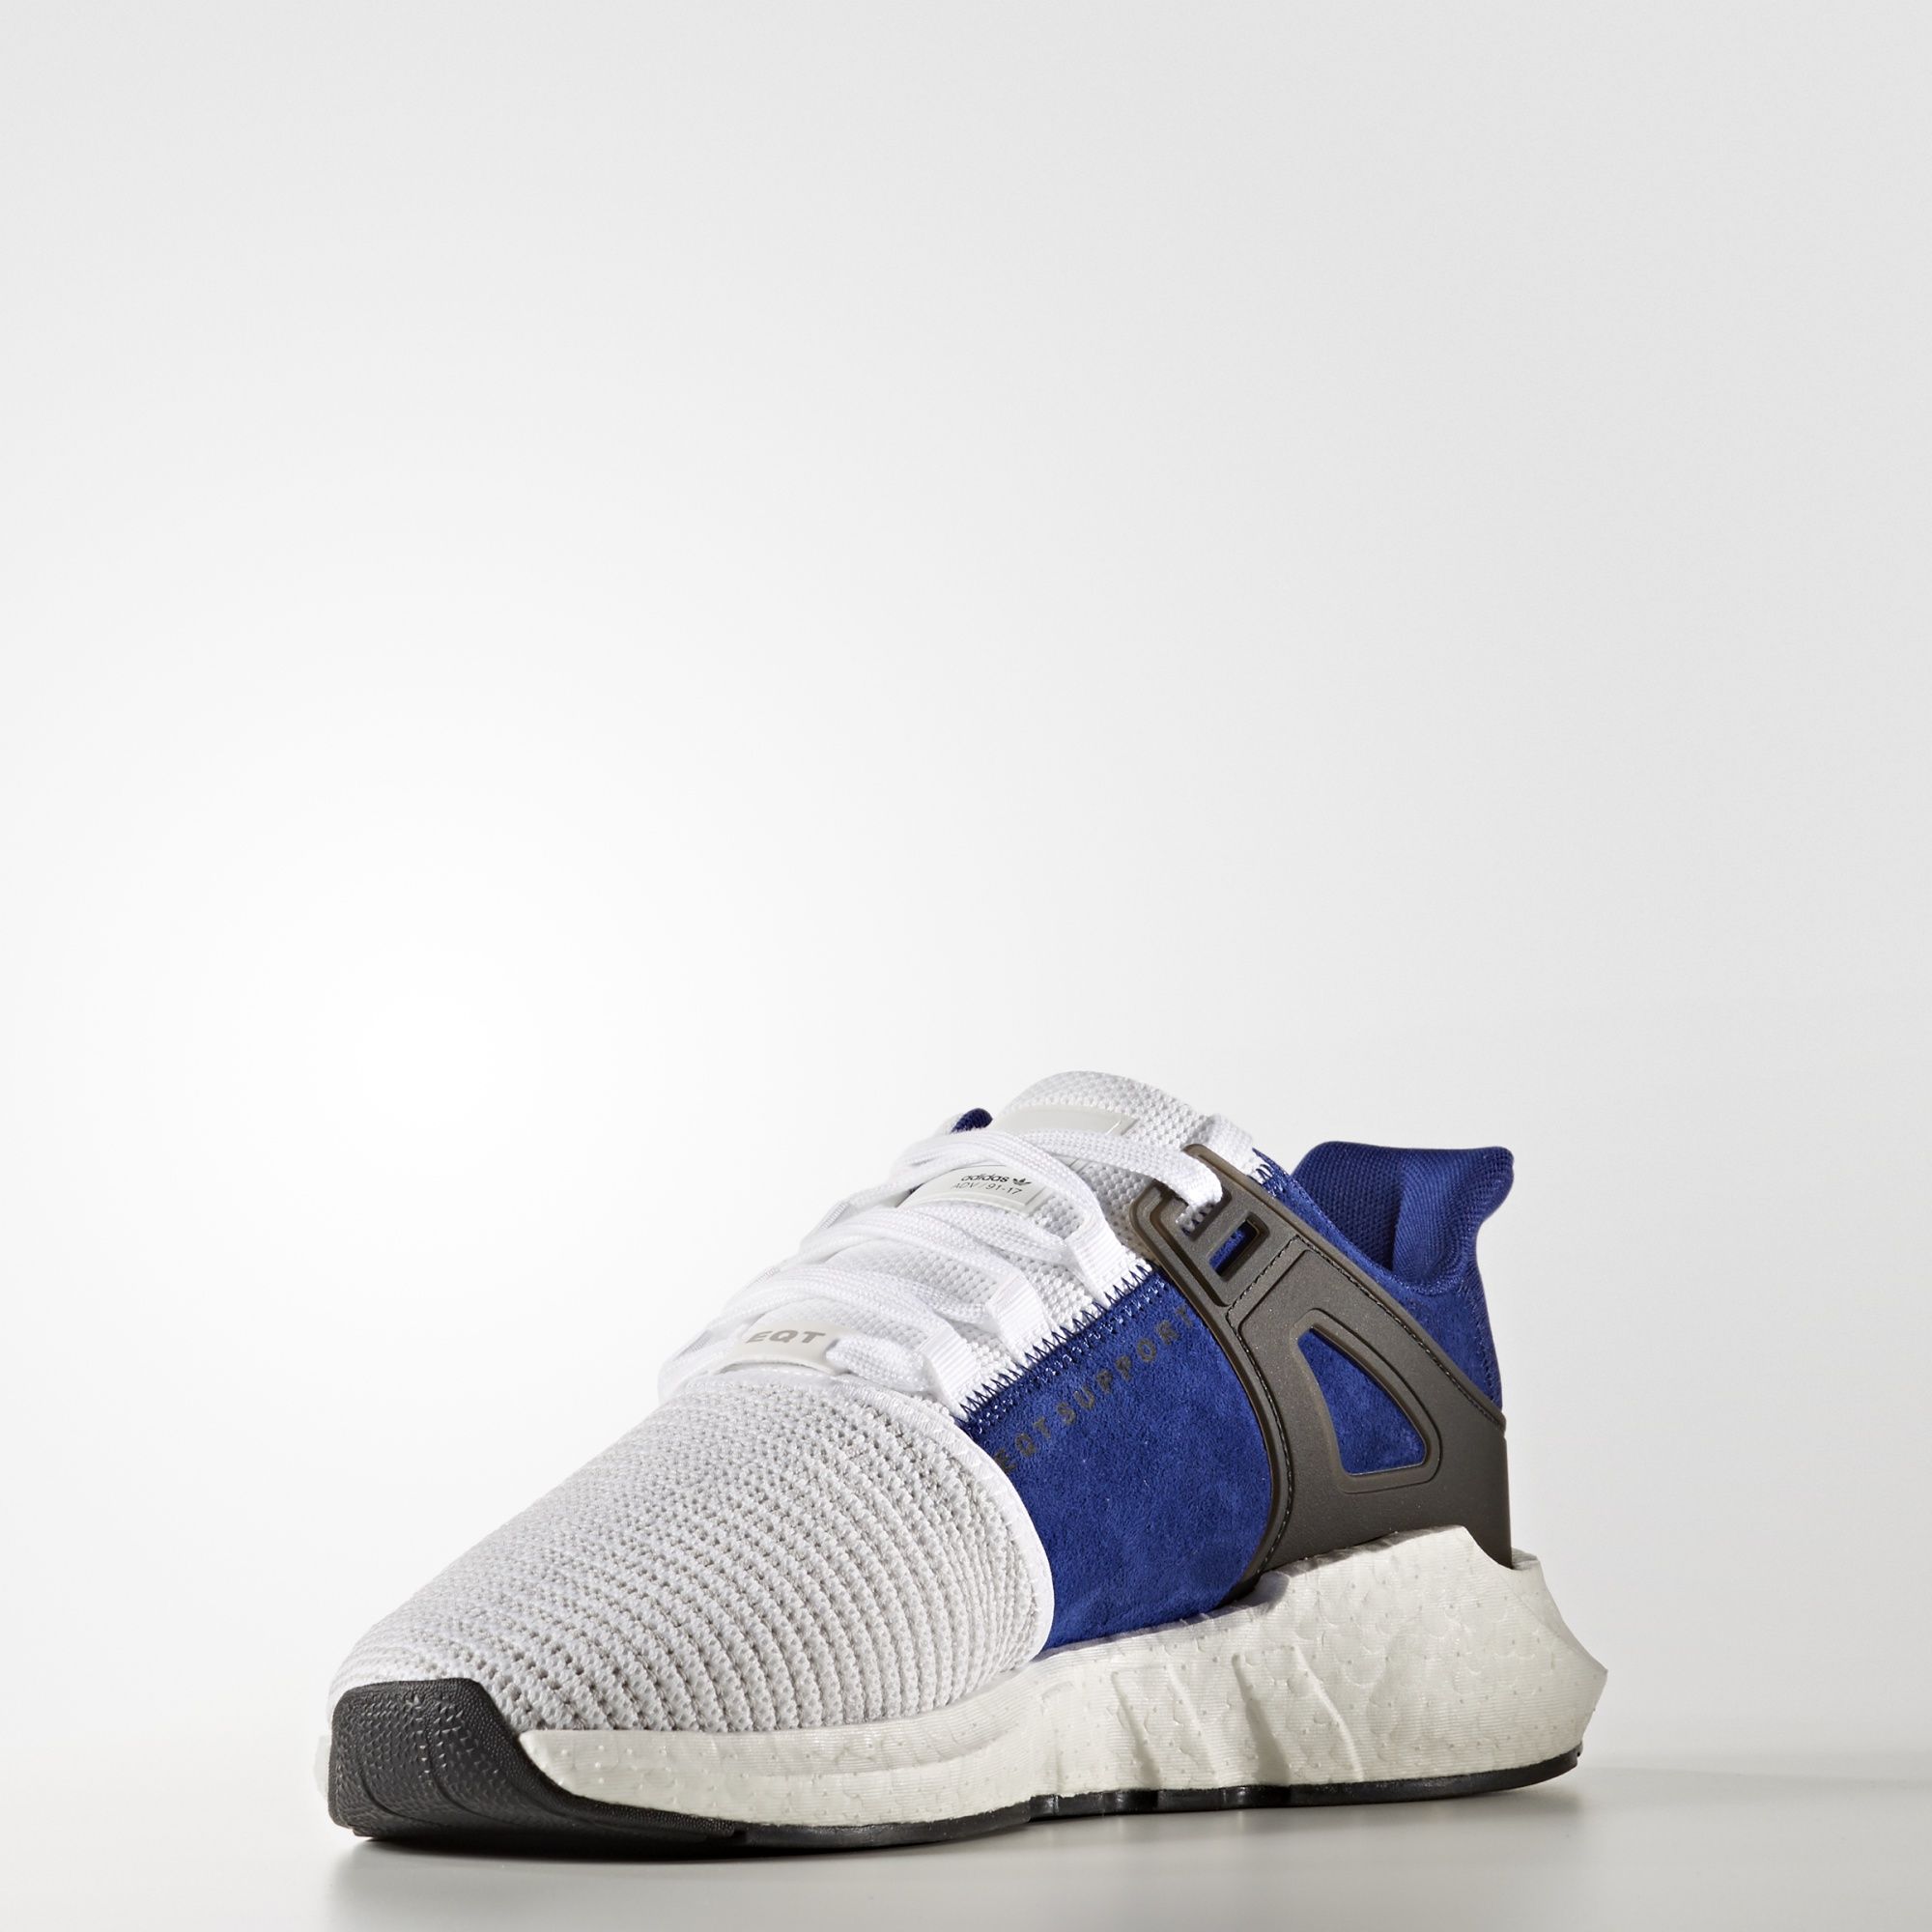 adidas-eqt-support-9317-white-royal-3